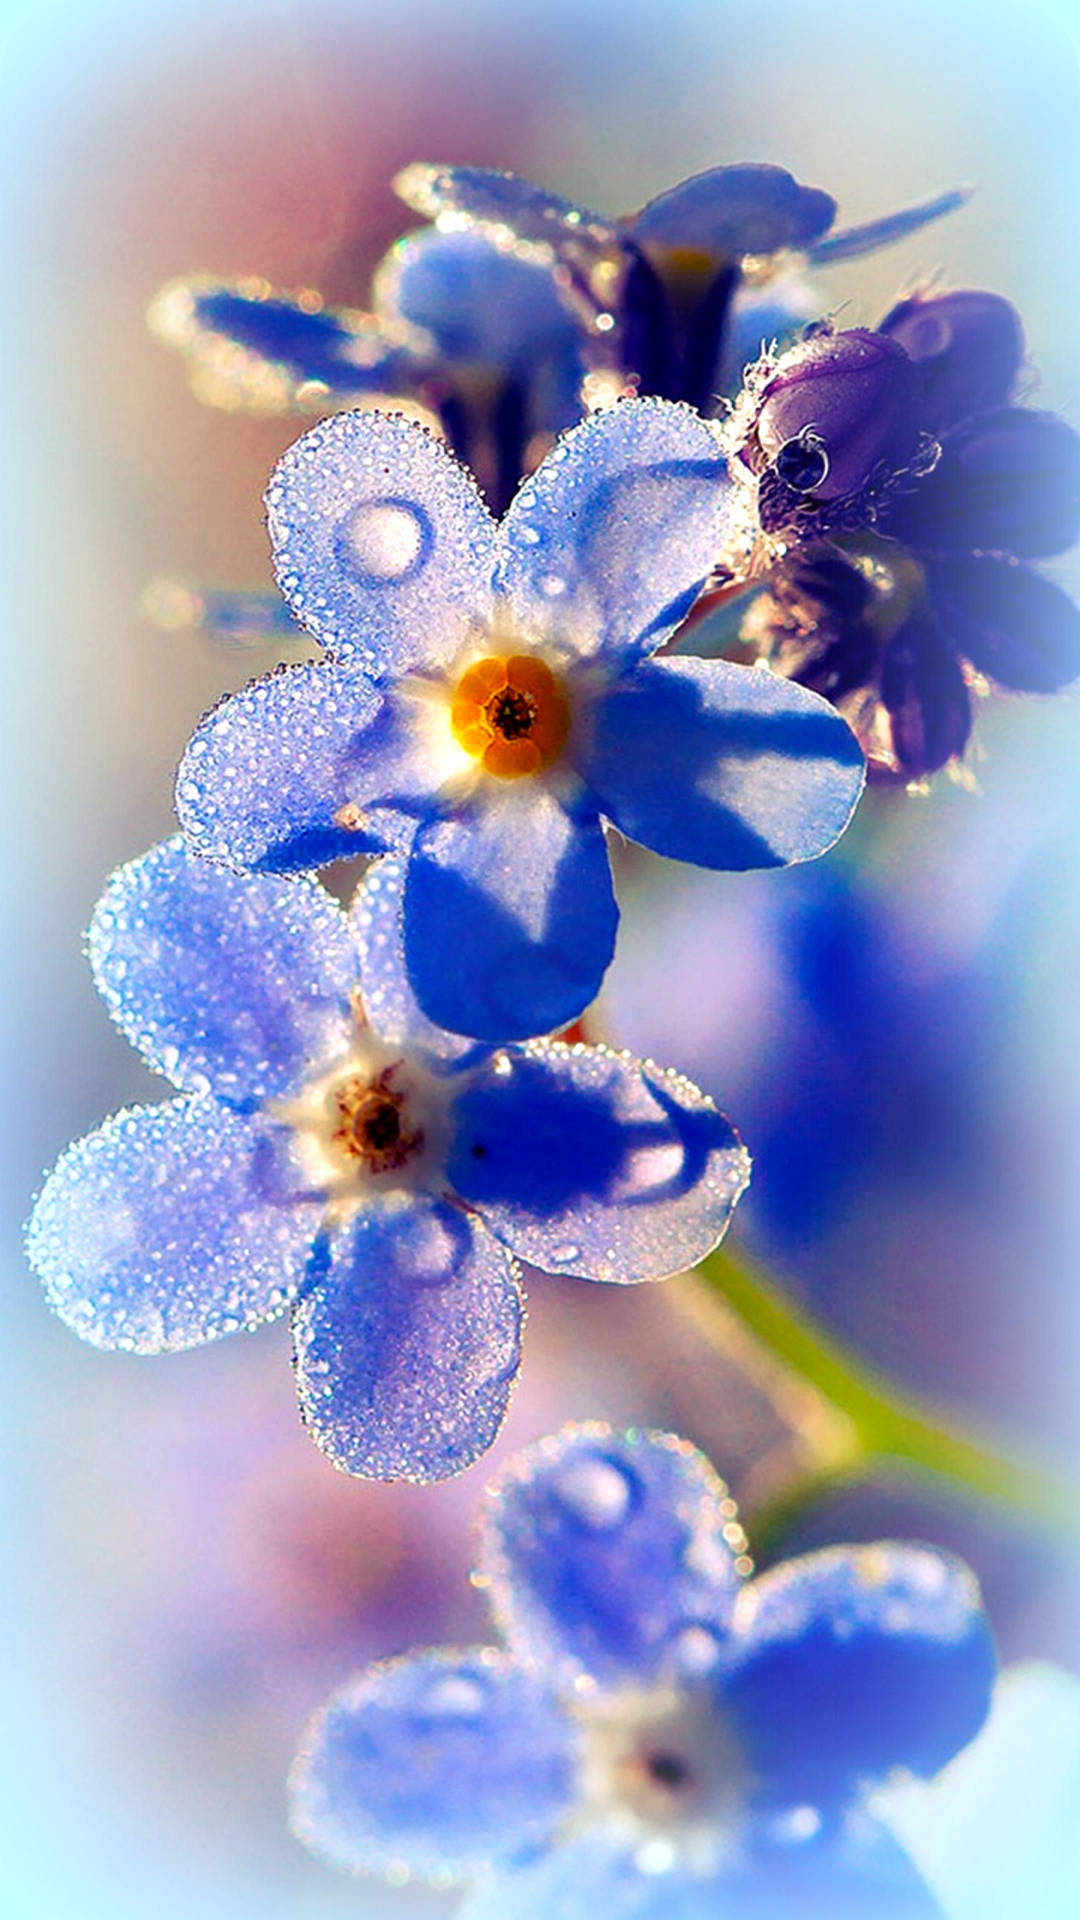 Adorable Blue Forget Me Not Flowers Wallpaper